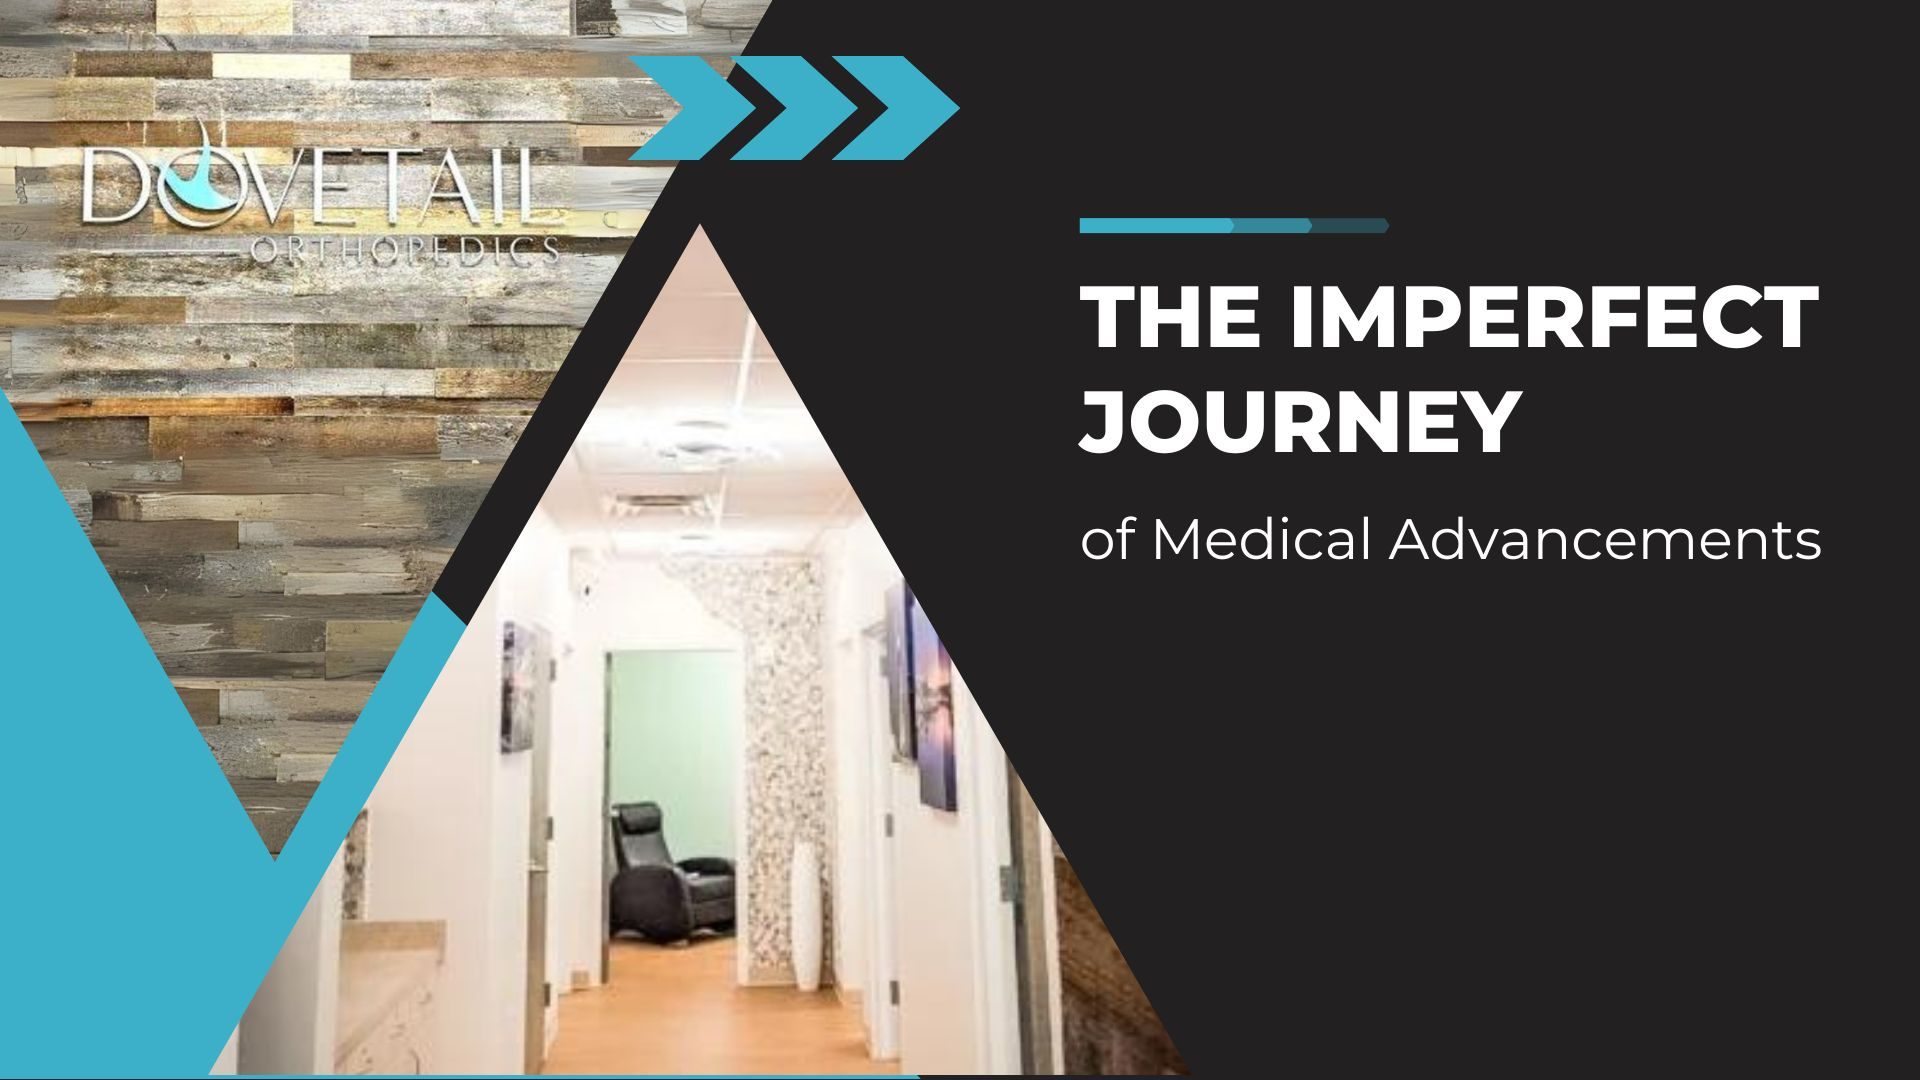 Promotional graphic for Dovetail Orthopedics featuring the text 'THE IMPERFECT JOURNEY of Medical Advancements'. The image has a modern design with a geometric layout, contrasting a wood plank wall on the left with a corridor of a medical facility on the right. The Dovetail Orthopedics logo is subtly displayed in the upper left corner, and there are decorative design elements such as arrows pointing rightward, indicating forward movement and progress.